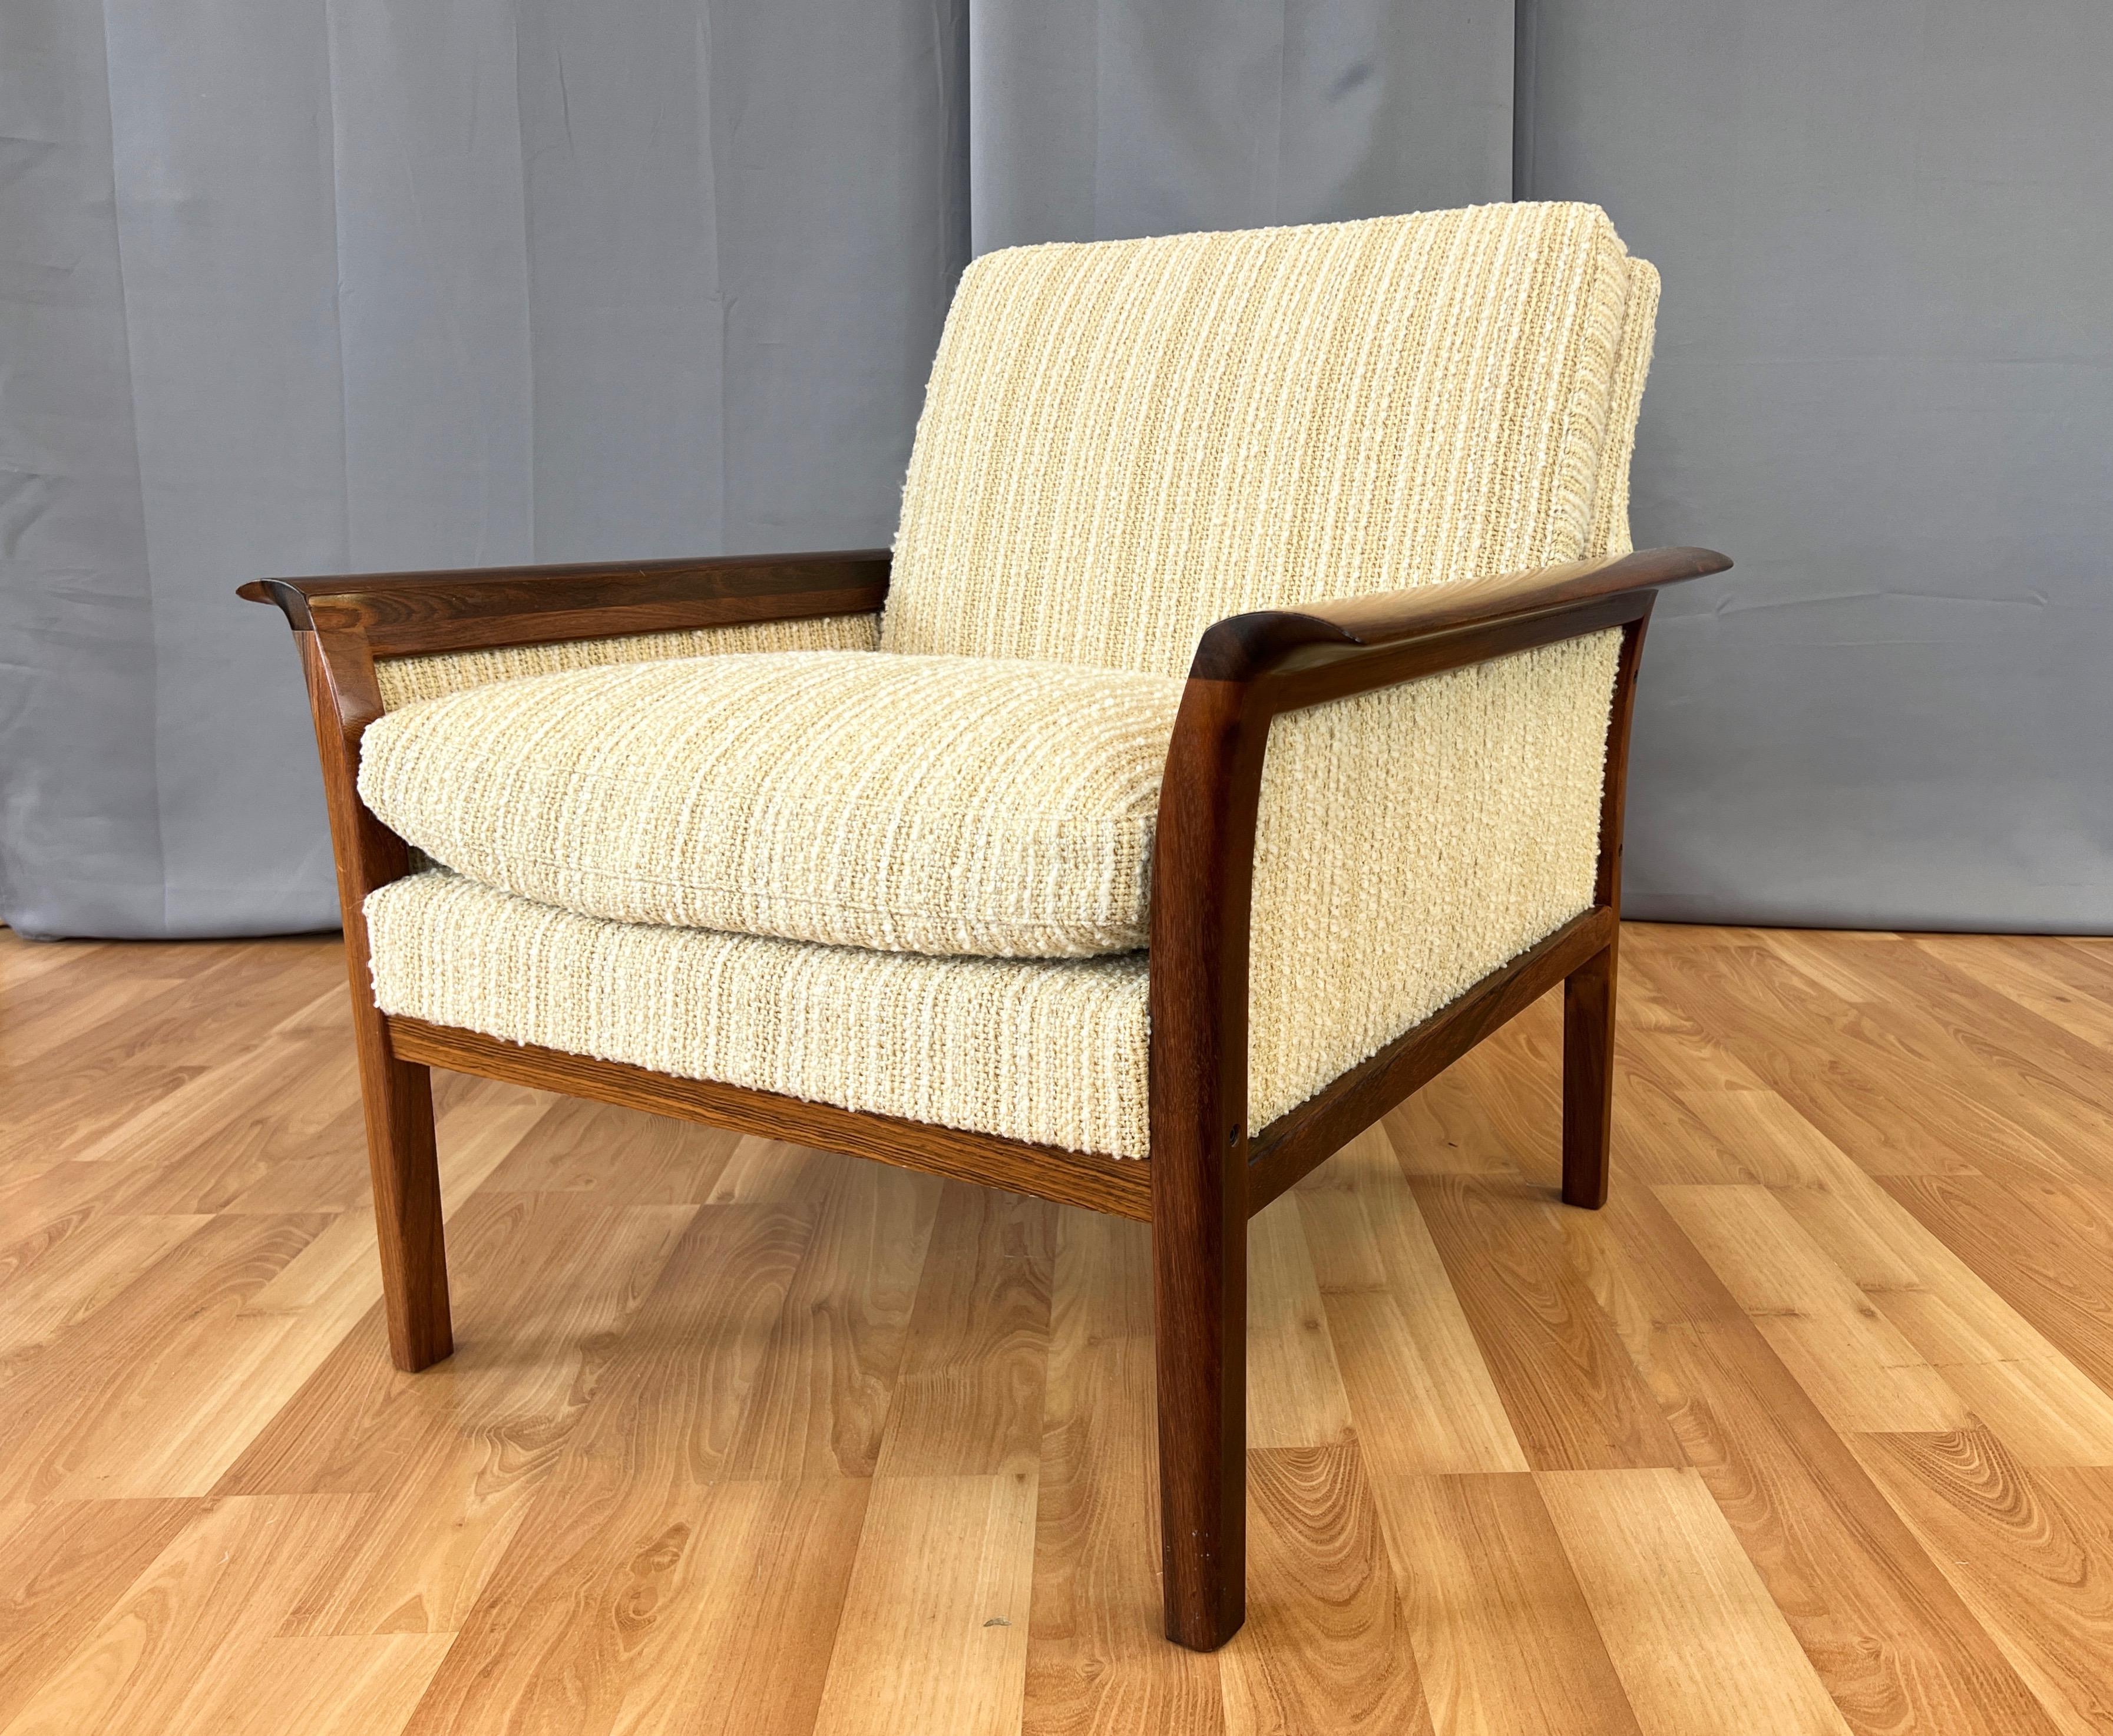 A very handsome 1976 rosewood and upholstery model 934 low-back lounge chair by Knut Sæter for Vatne Møbler of Norway, and originally retailed by Copenhagen in San Francisco.

Features a solid rosewood frame with distinctive and sculptural waterfall